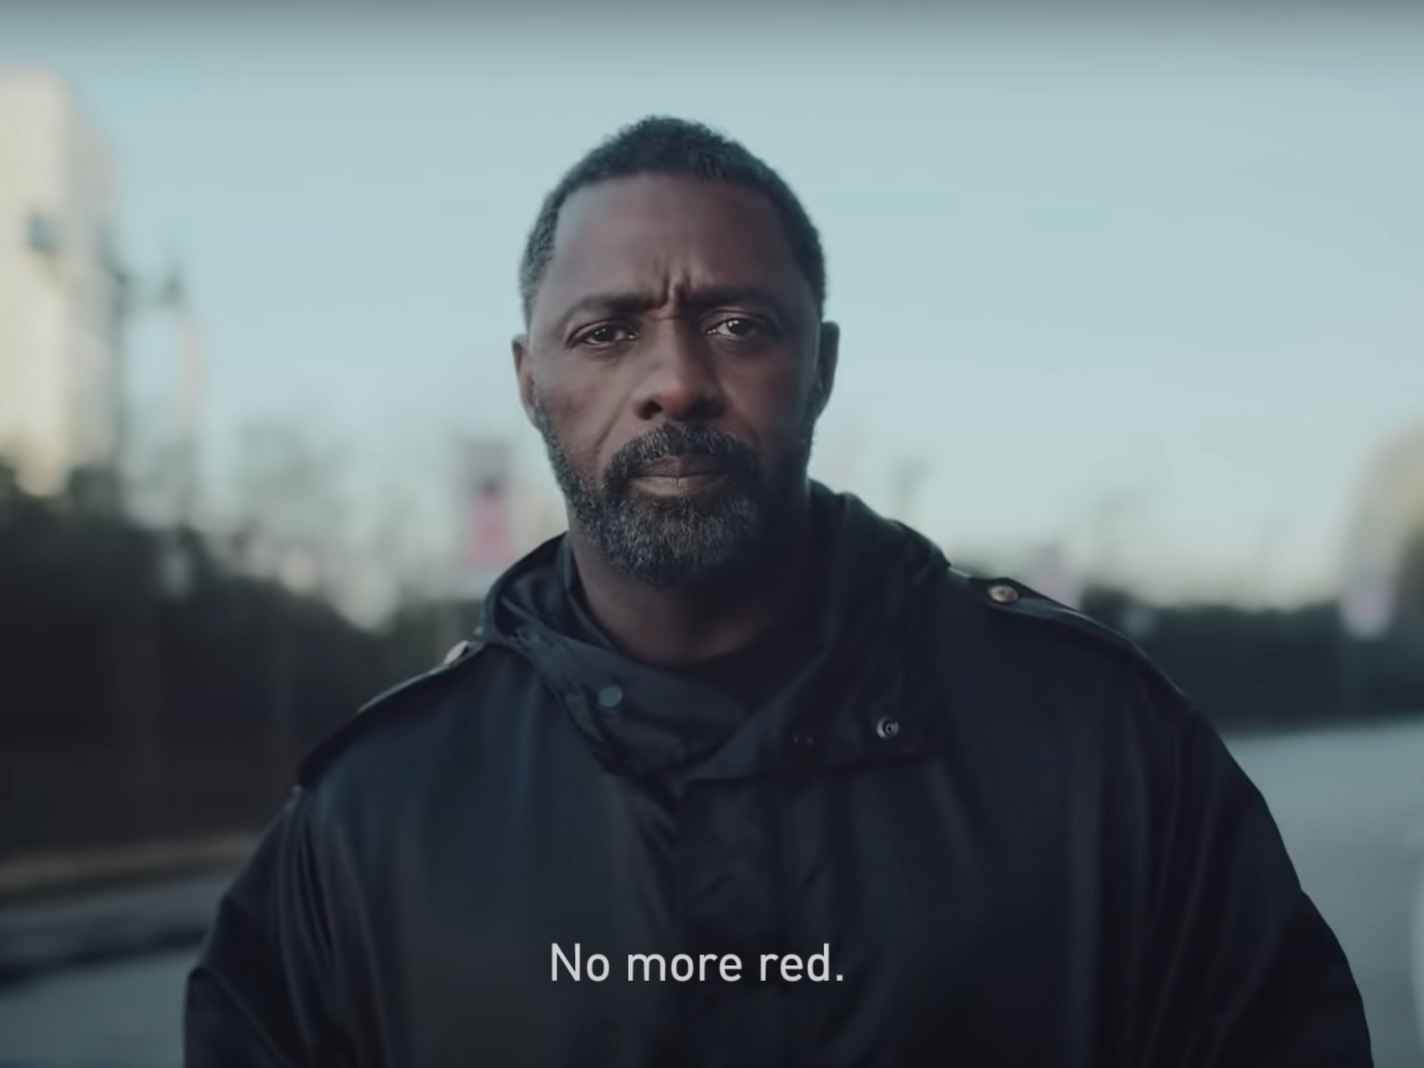 Idris Elba features in the promo for new Arsenal all-white kit